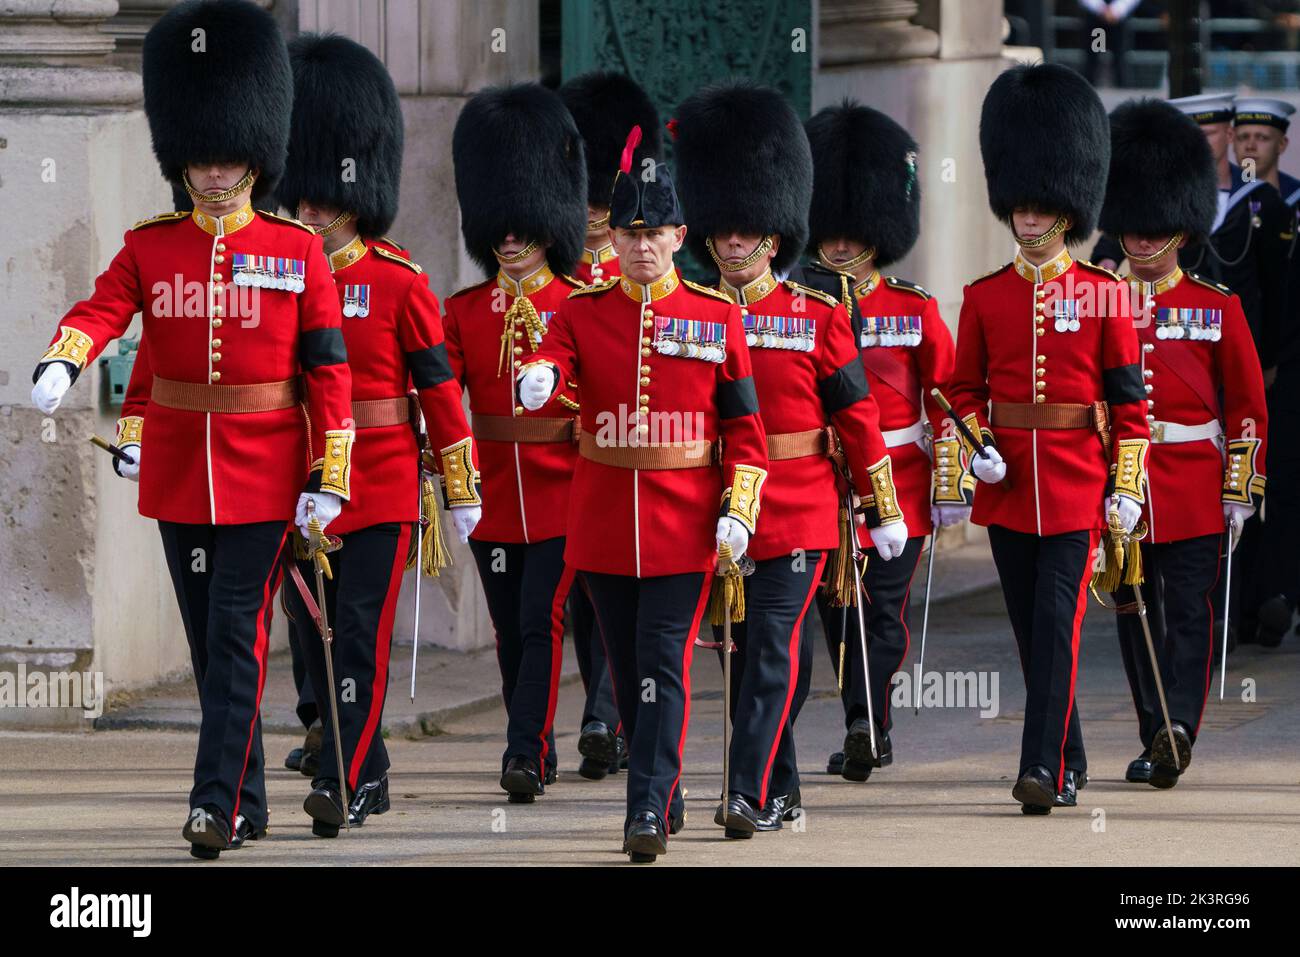 LONDON - SEPTEMBER 19: Officers from the British Guards regiments at the State Funeral of Queen Elizabeth II on September 19, 2022. The Foot Guards are the Regular Infantry regiments of the Household Division of the British Army. They are the Grenadier Guards, Coldstream Guards, Scots Guards, Irish Guards, Welsh Guards Photo: David Levenson/Alamy Stock Photo